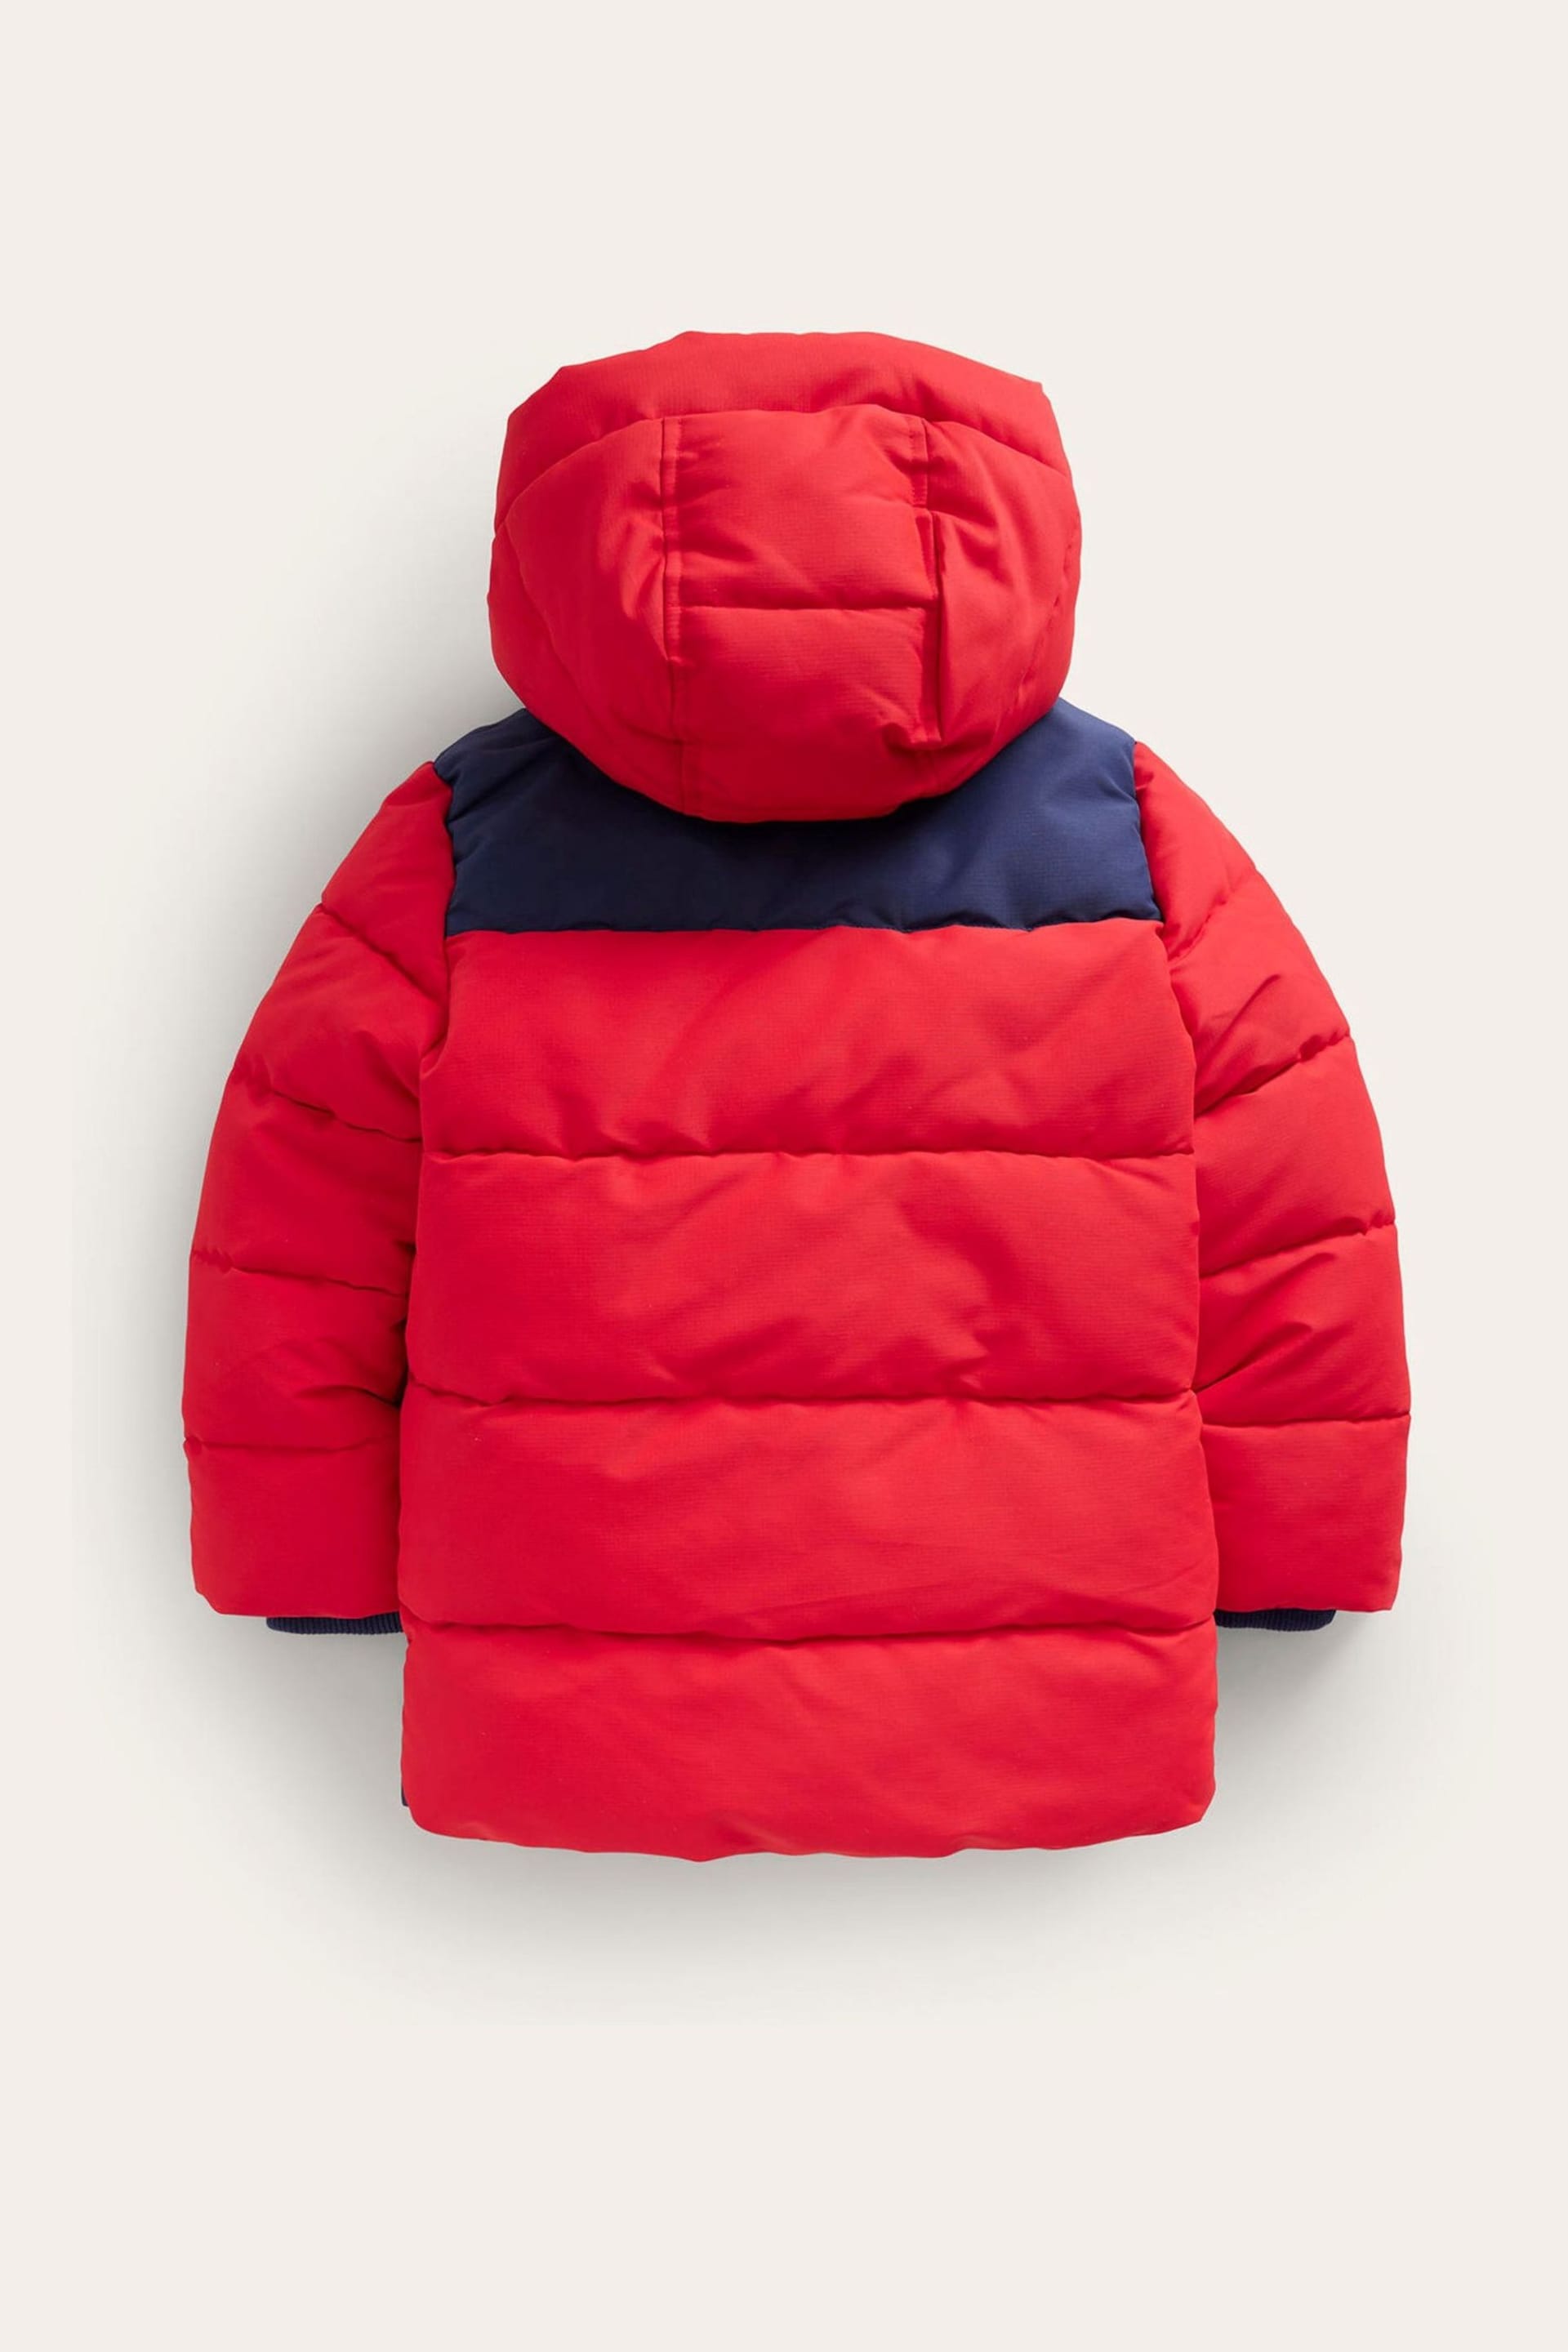 Boden Red Lined Padded Winter Coat - Image 2 of 4